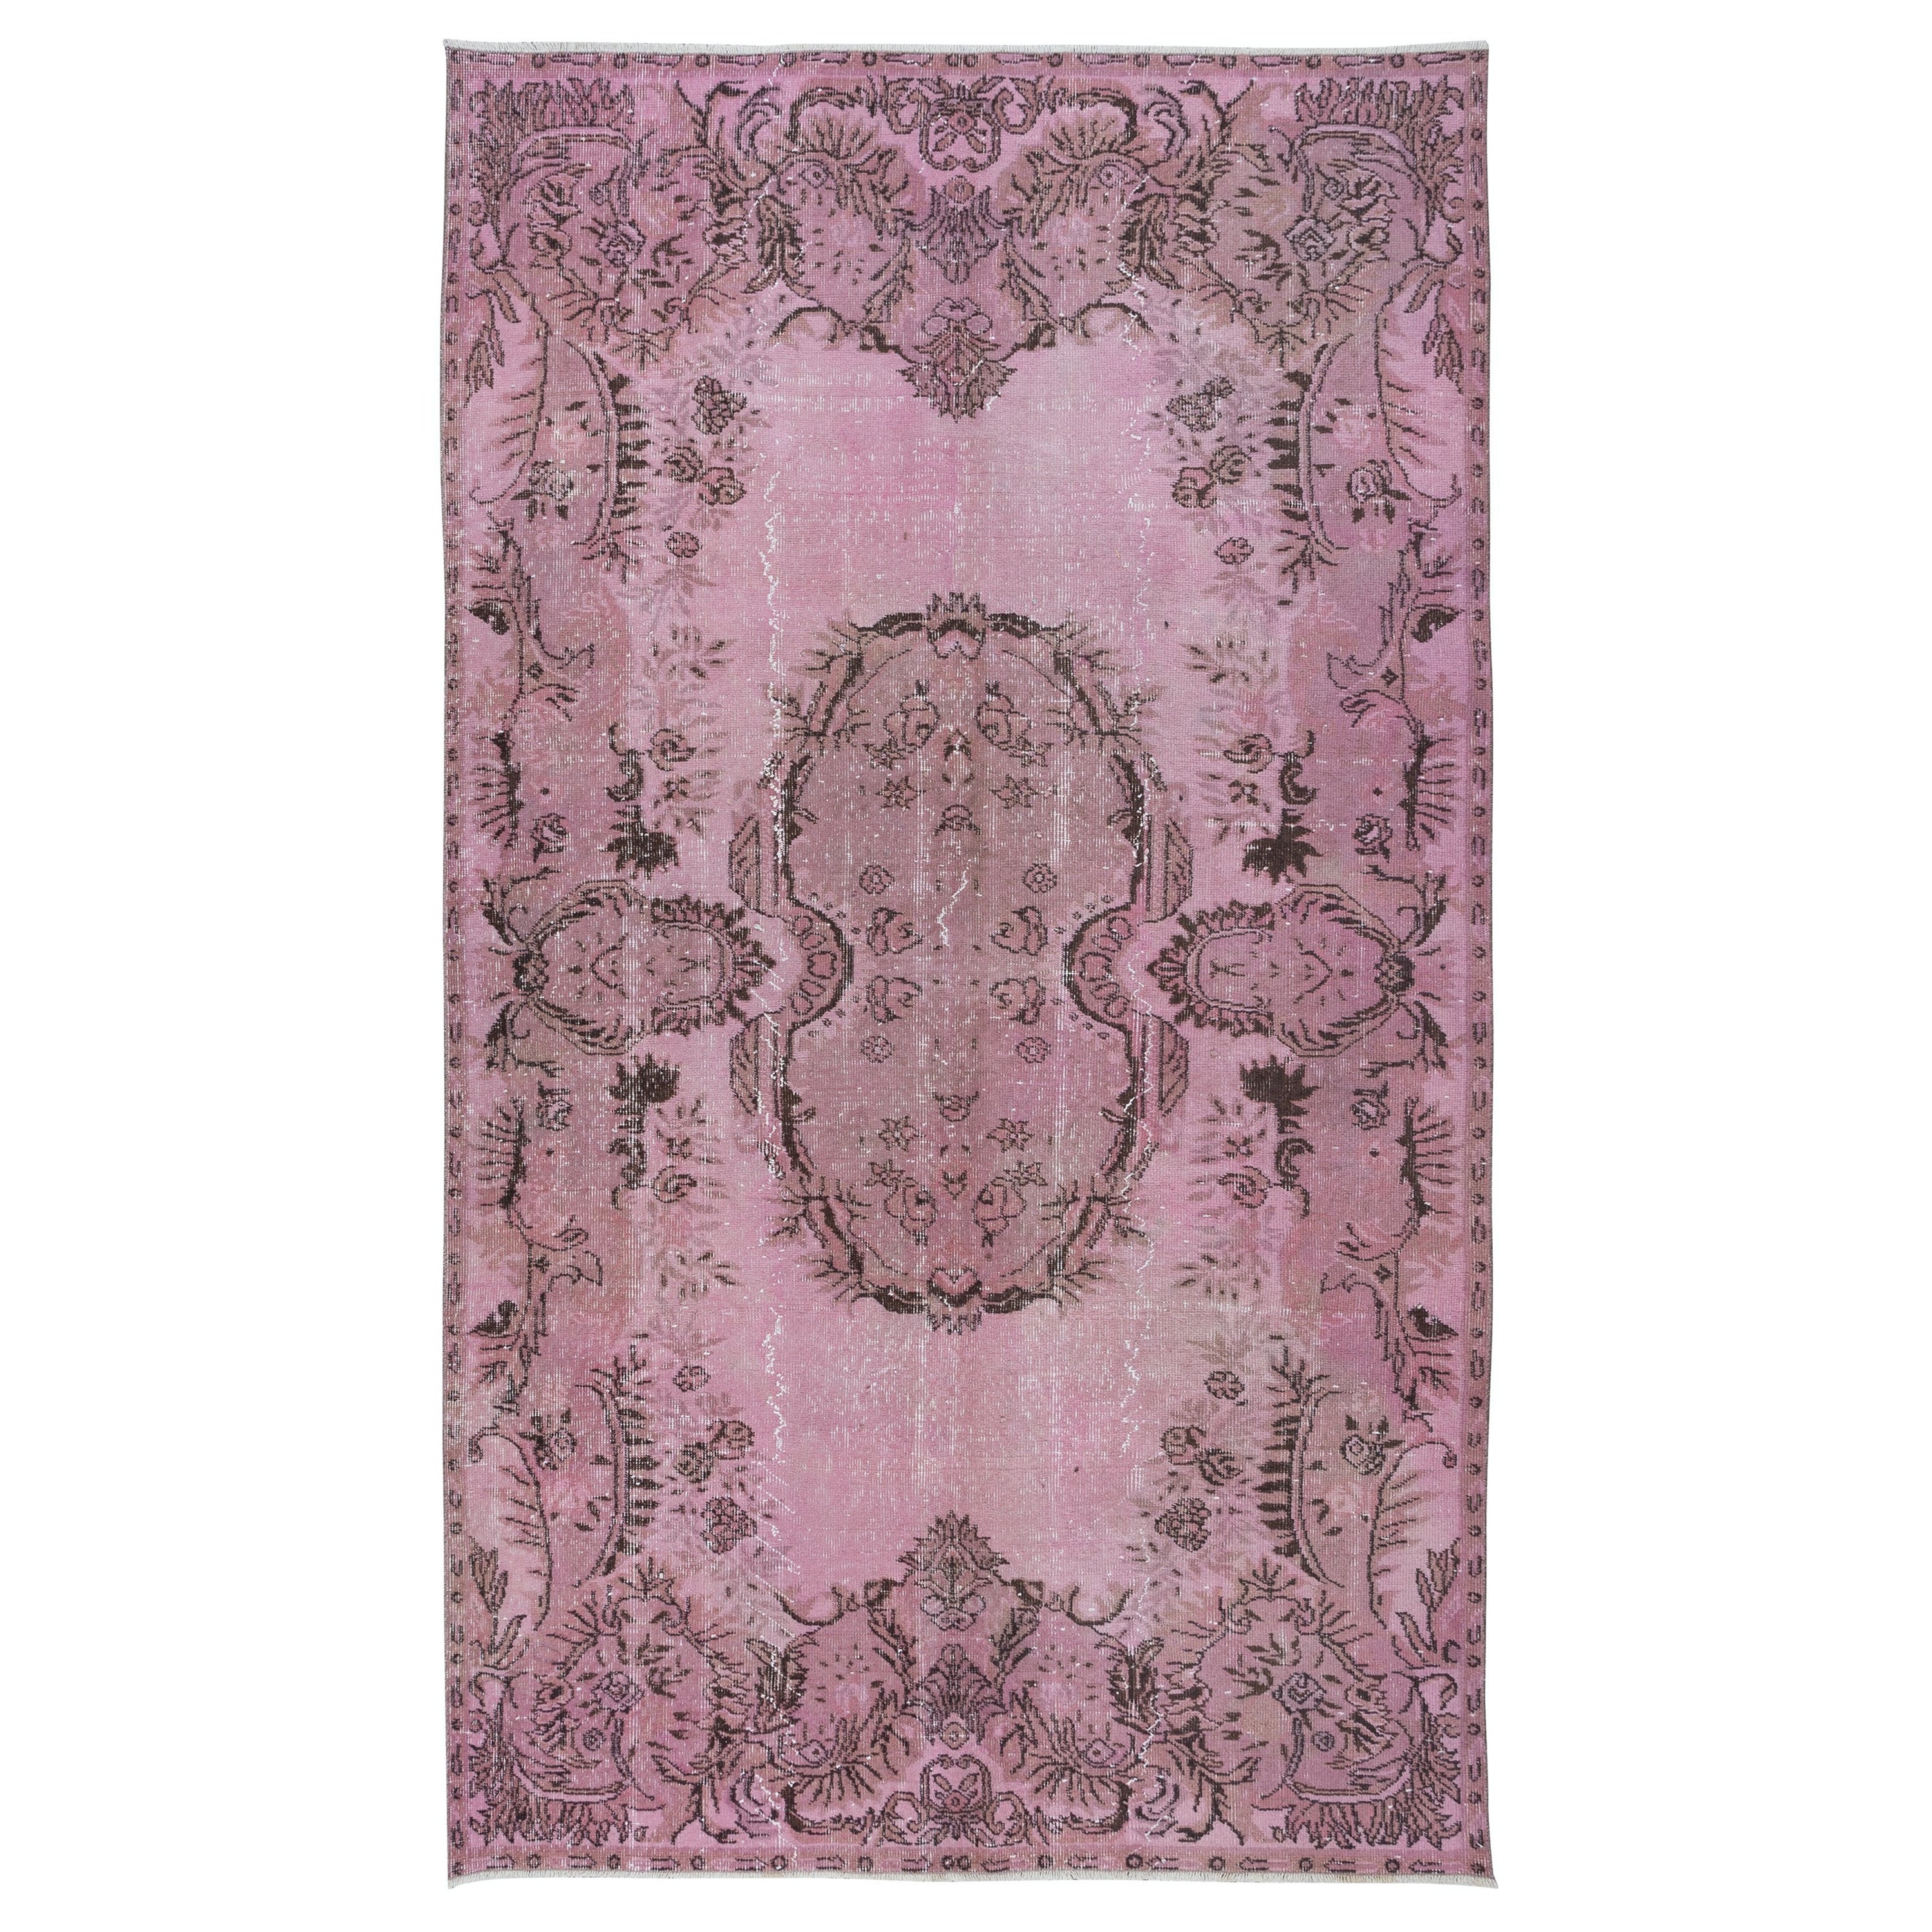 5.6x9.6 Ft Handmade Turkish Sparta Area Rug in Light Pink for Modern Interior For Sale